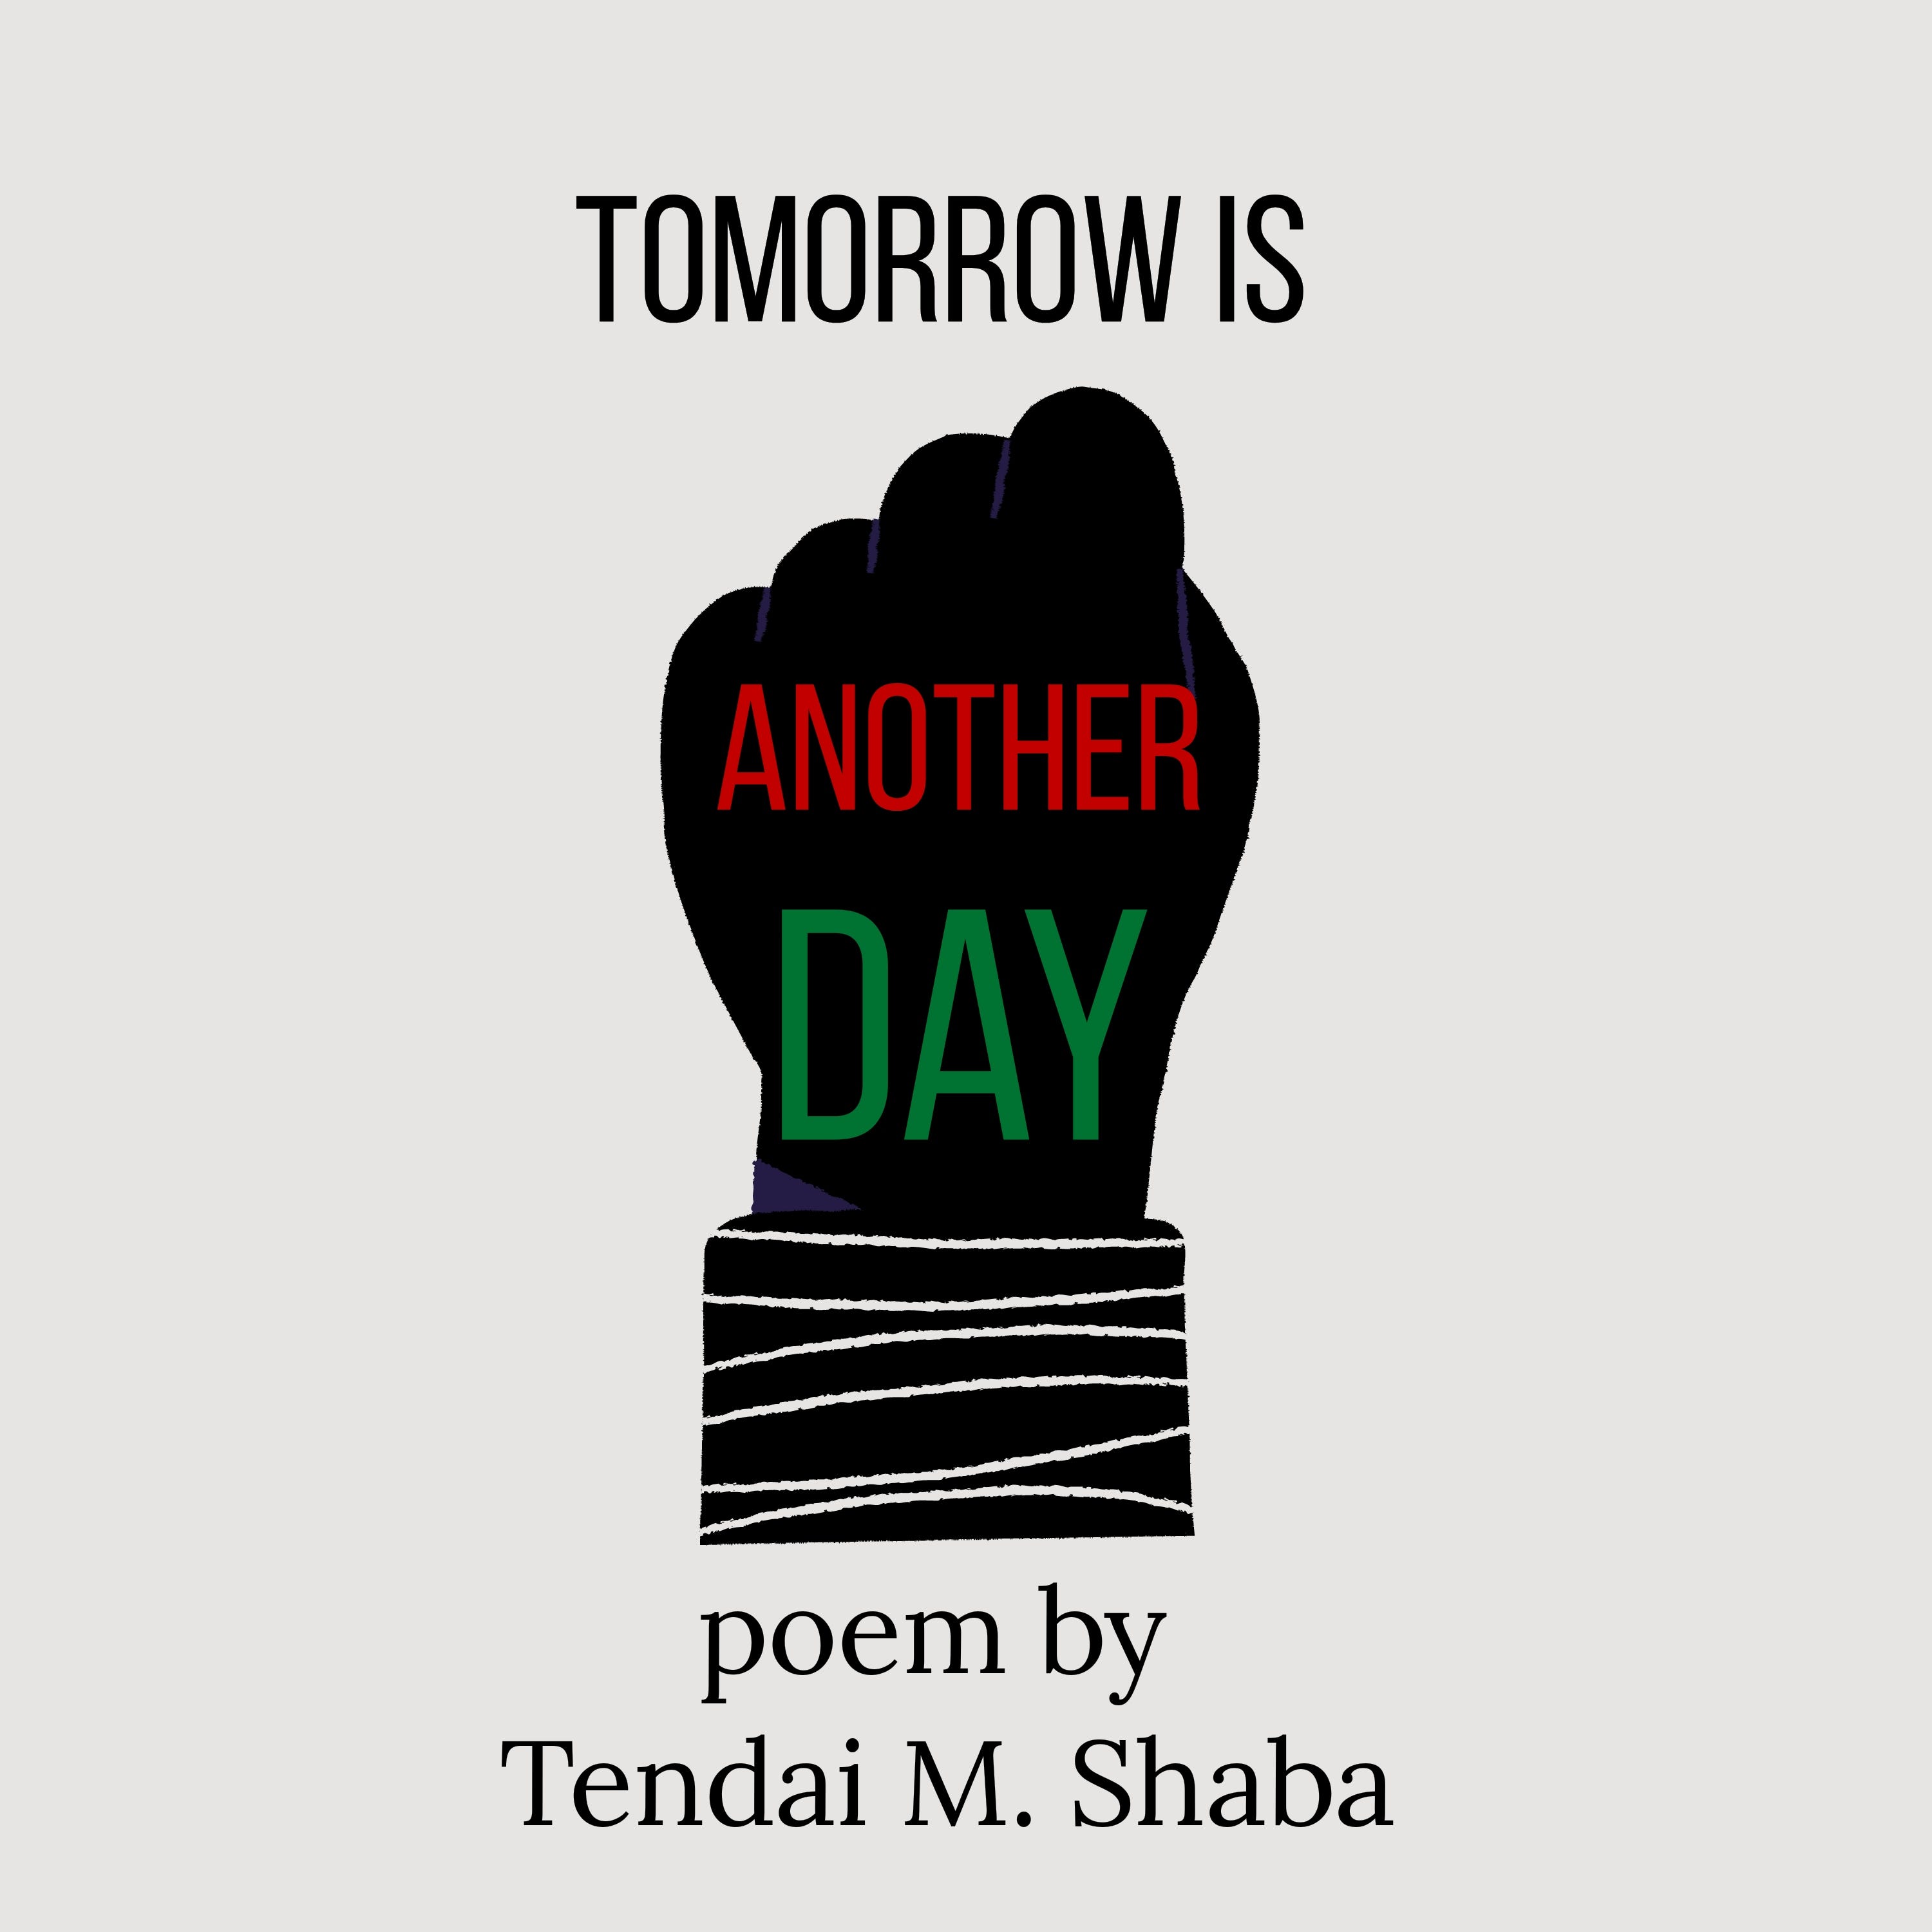 Tomorrow Is Another Day Poem Tomorrow Is Another Day Cry And Cry By Tendai Shaba Medium